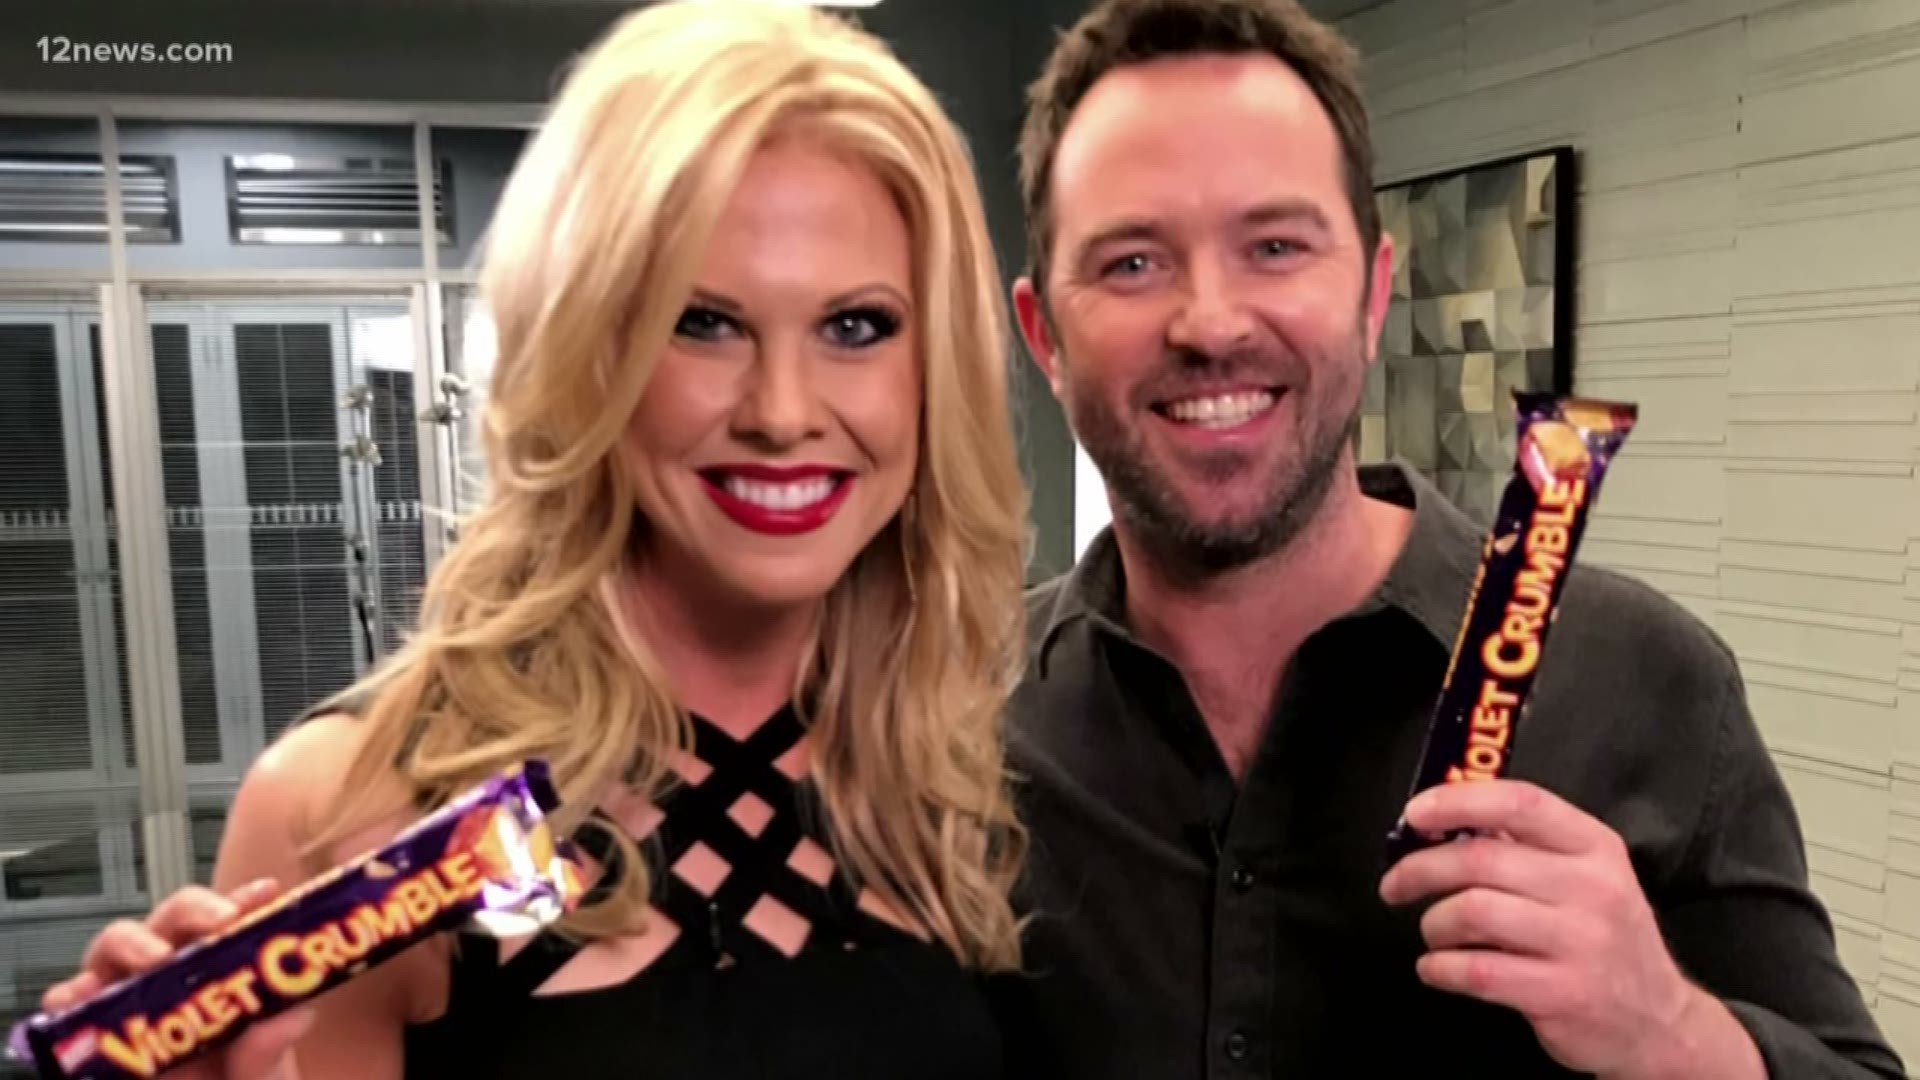 "Blindspot" star Sullivan Stapleton is an Australian native with a serious sweet tooth. 12 News' Krystle Henderson surprised him with his favorite Australian candy while visiting him on set.